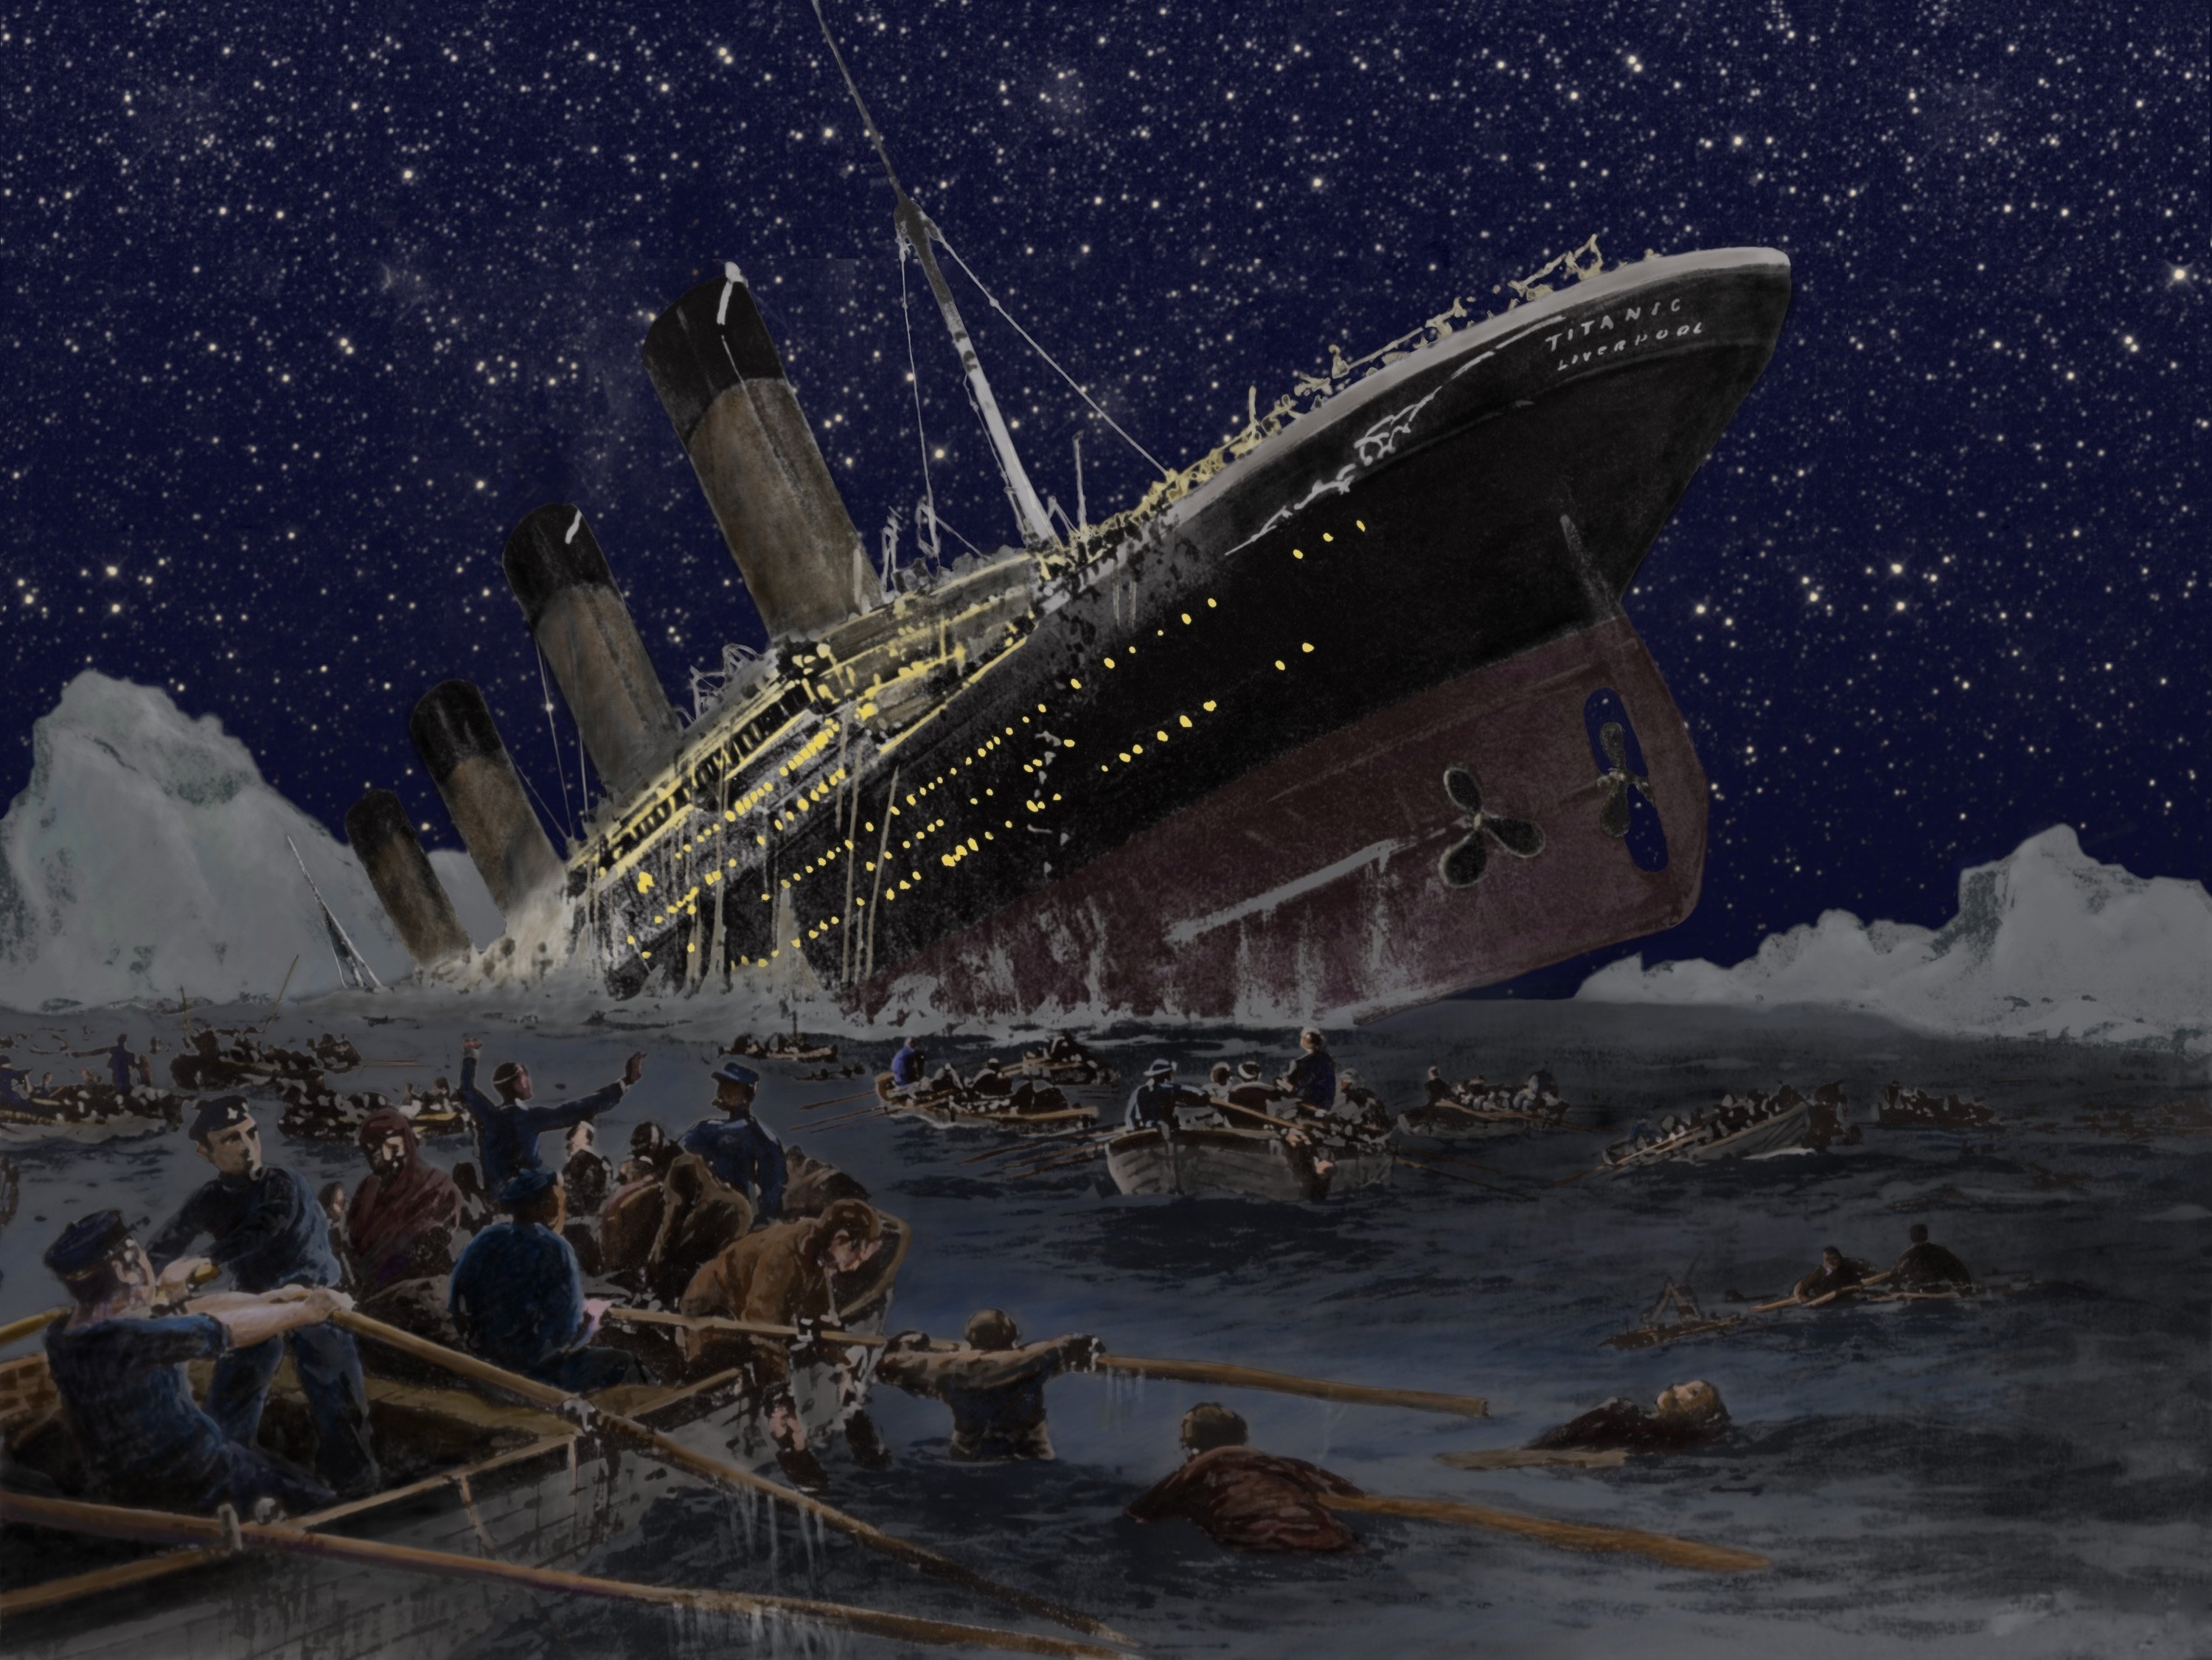 Titanic sinking and people being saved thanks to the ship’s wireless telegraphy device